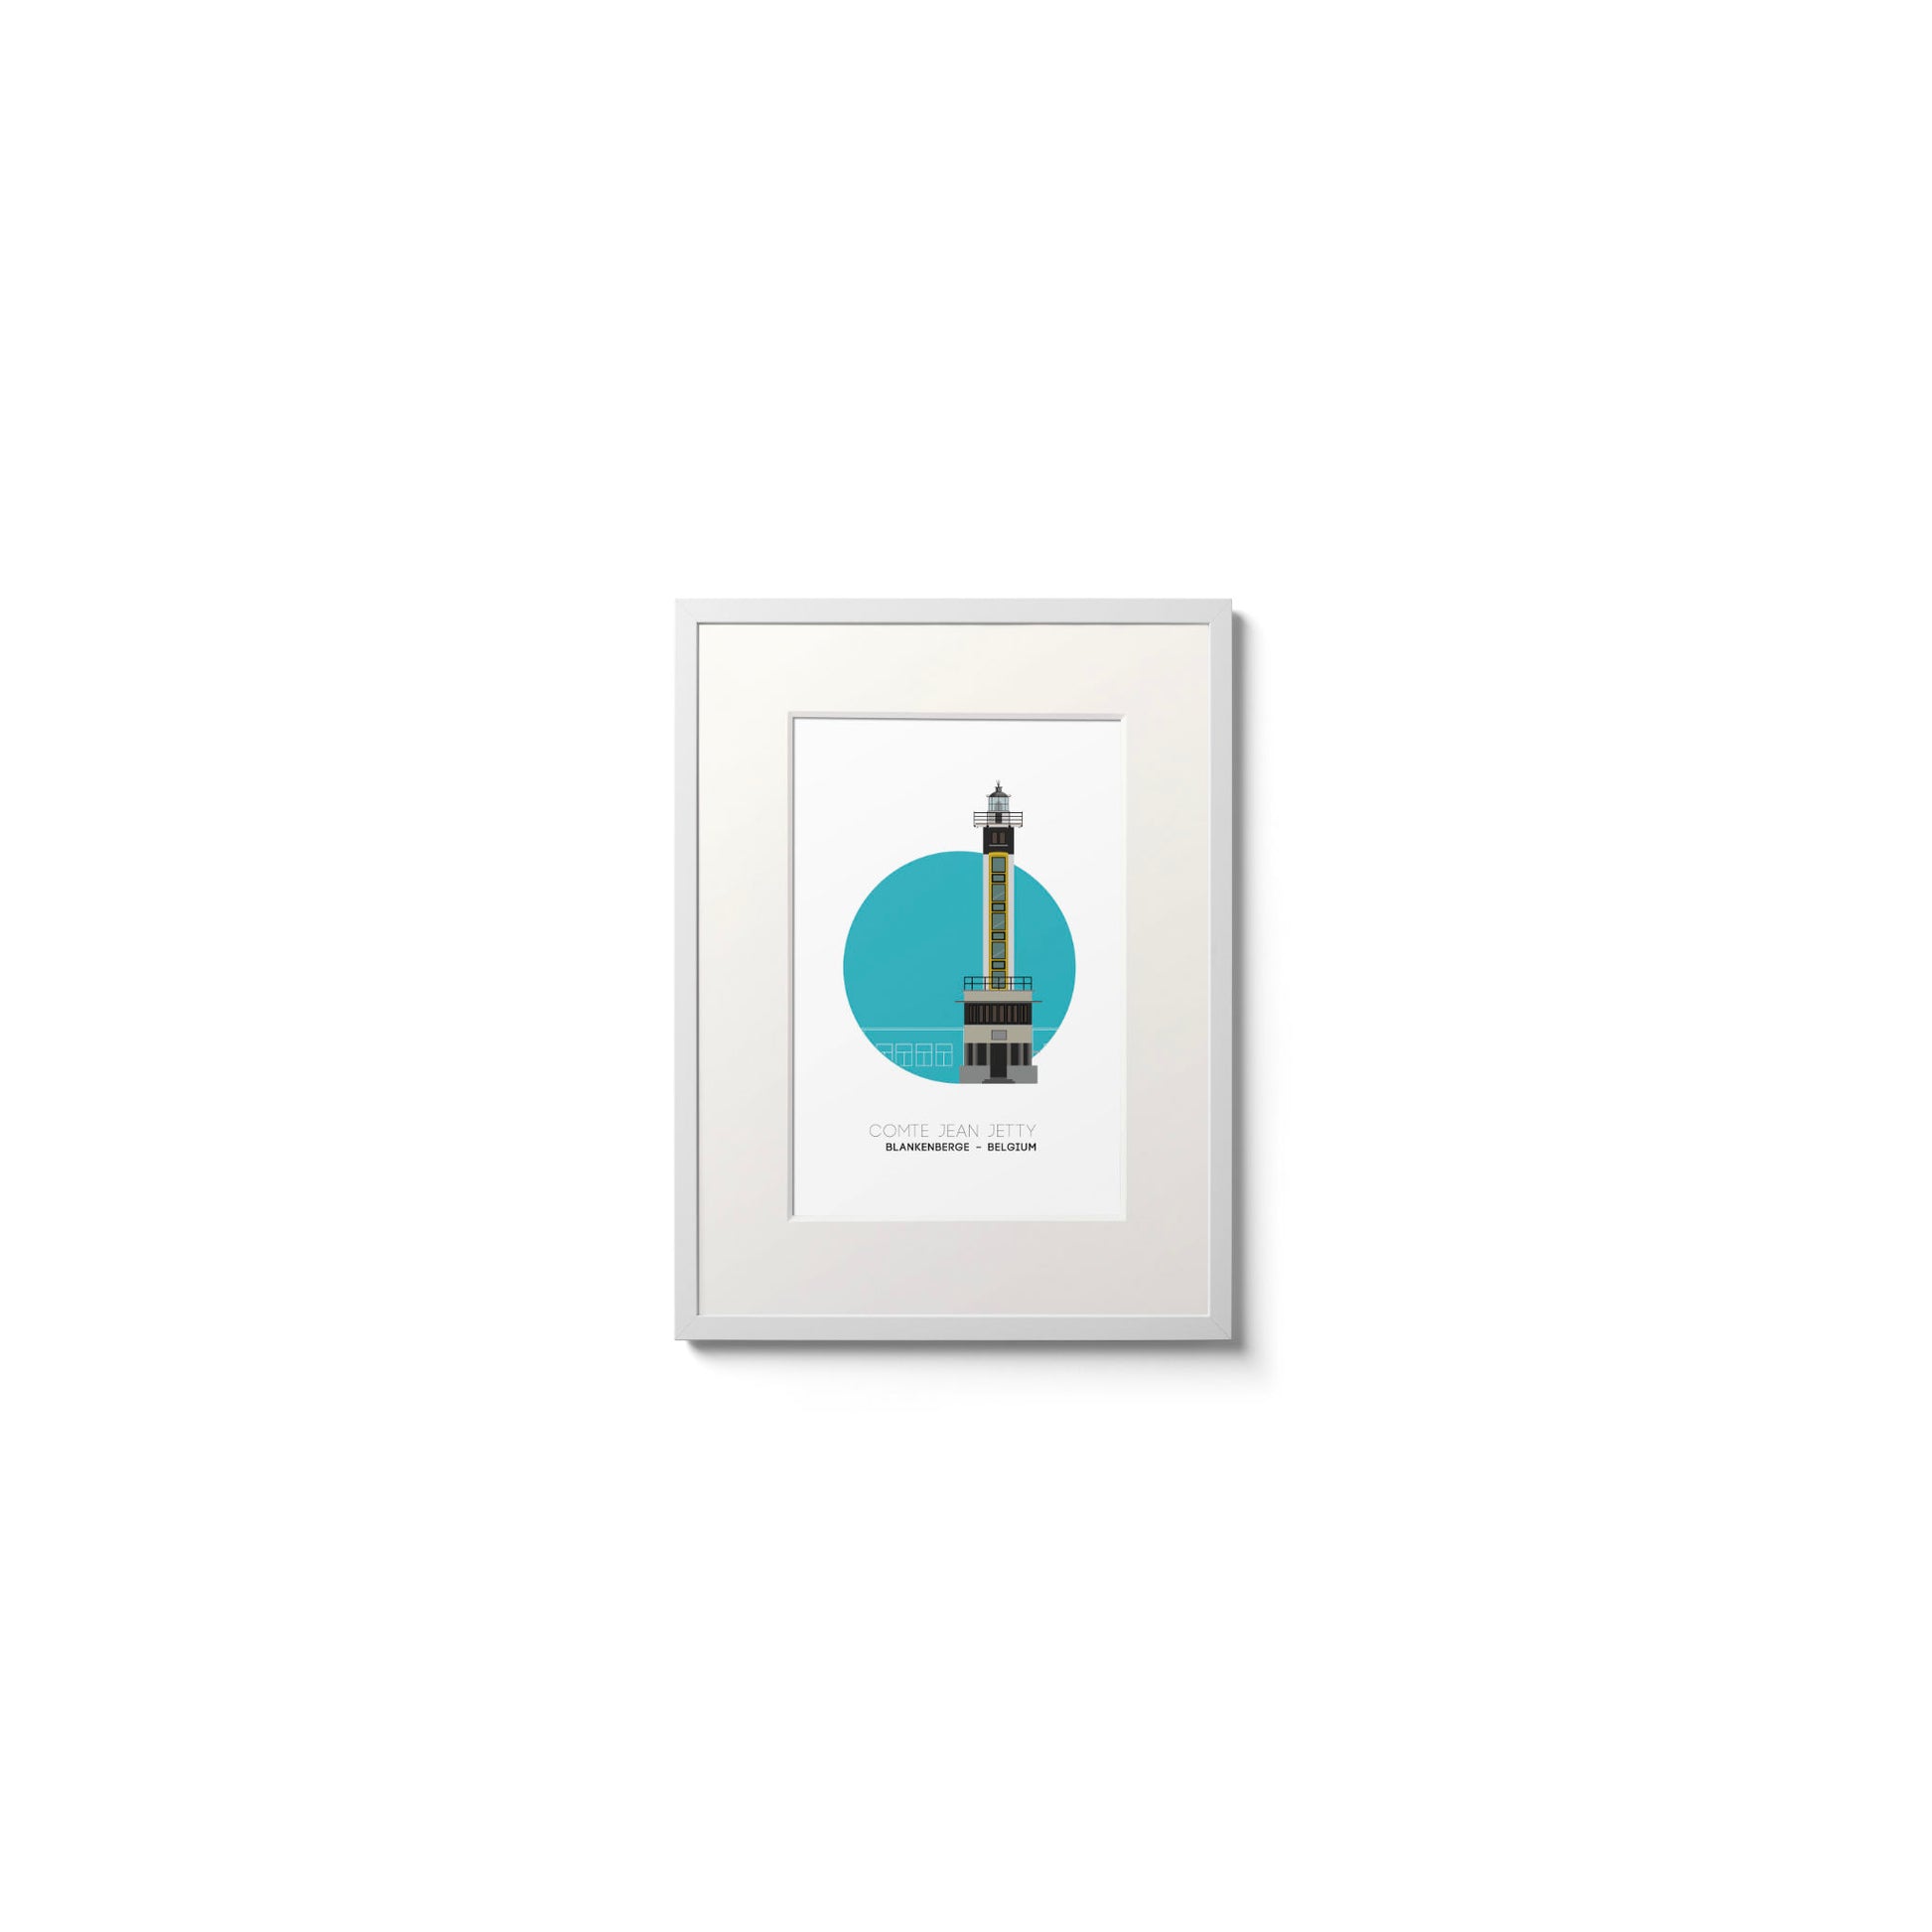 Illustration of the Compte Jean Jetty lighthouse, Blankenberge Belgium. On a white background with aqua blue circle as a backdrop, framed and measuring 15x20cm.